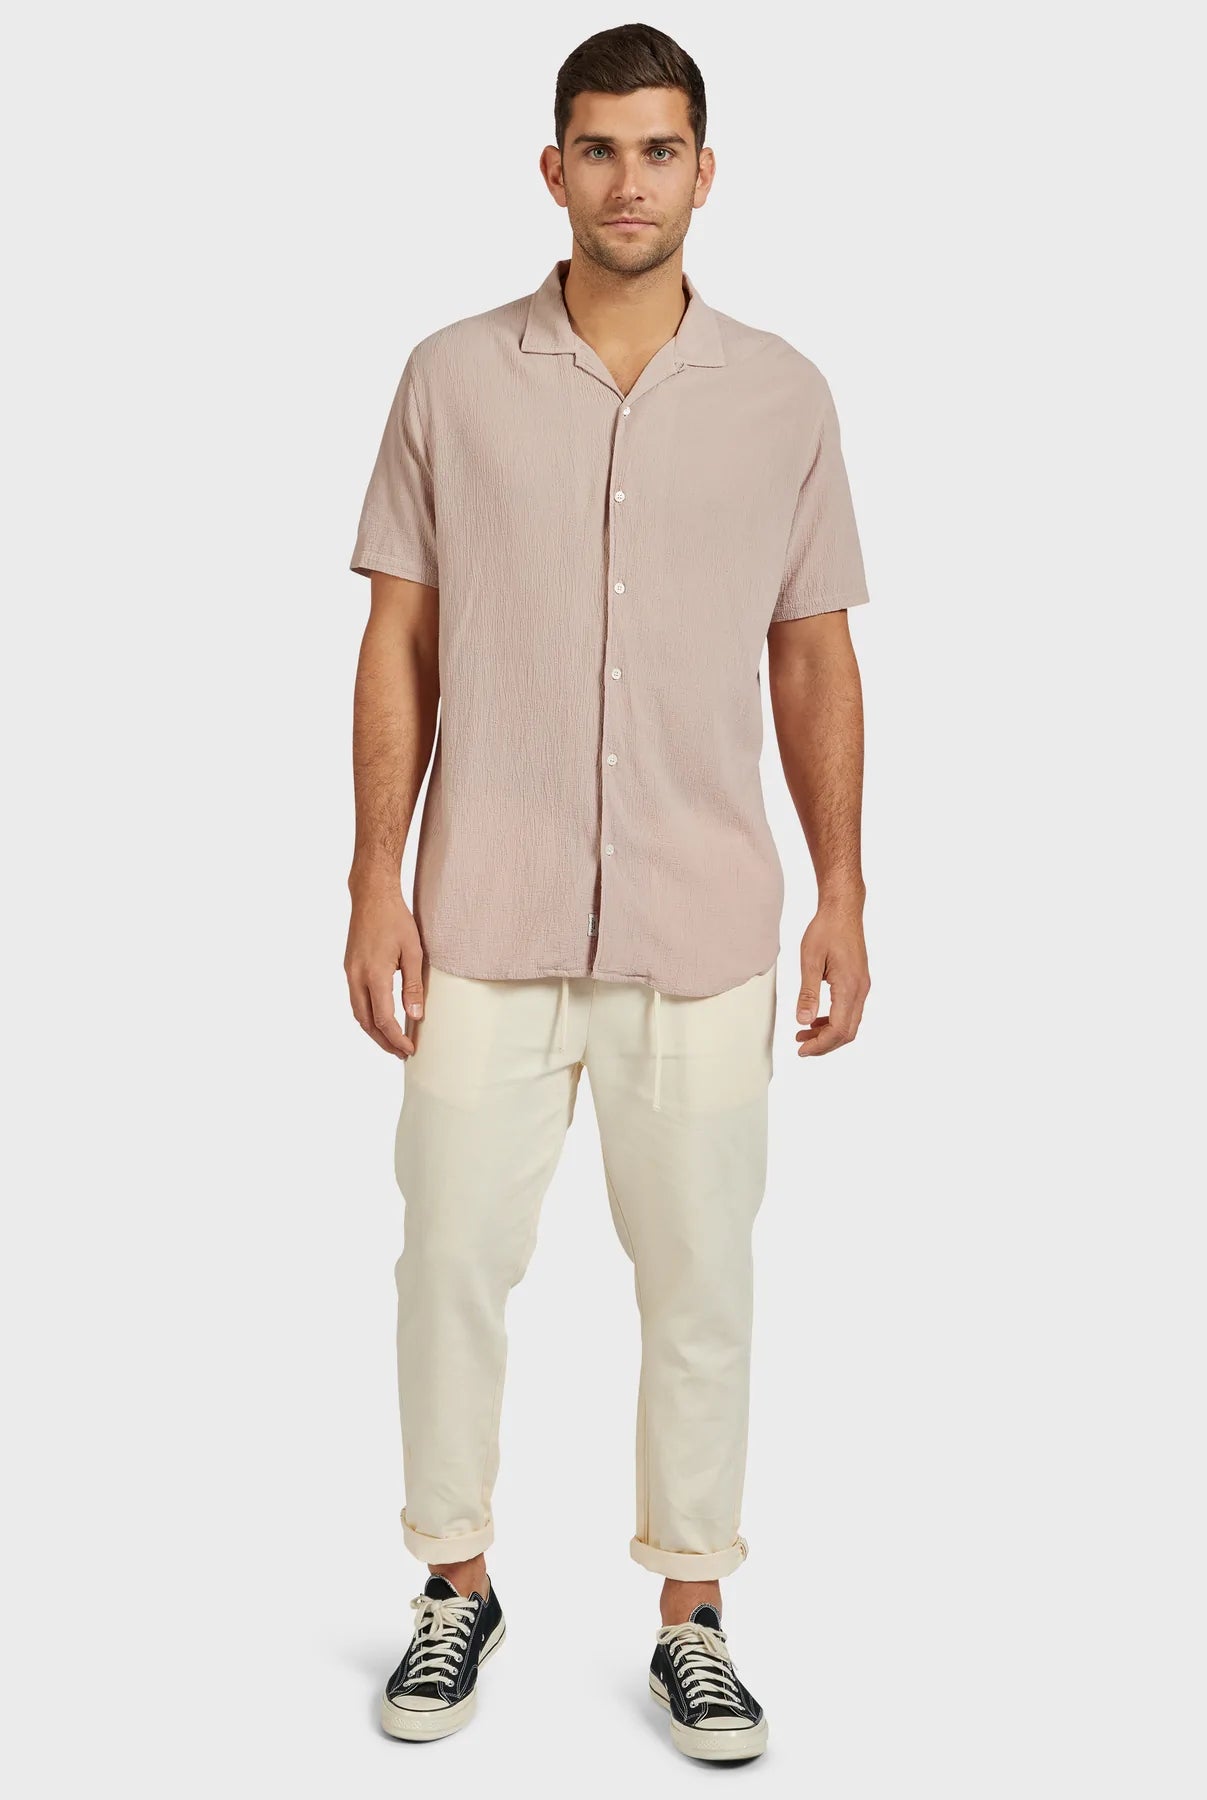 Bedford Short Sleeve Shirt in Dusty Pink